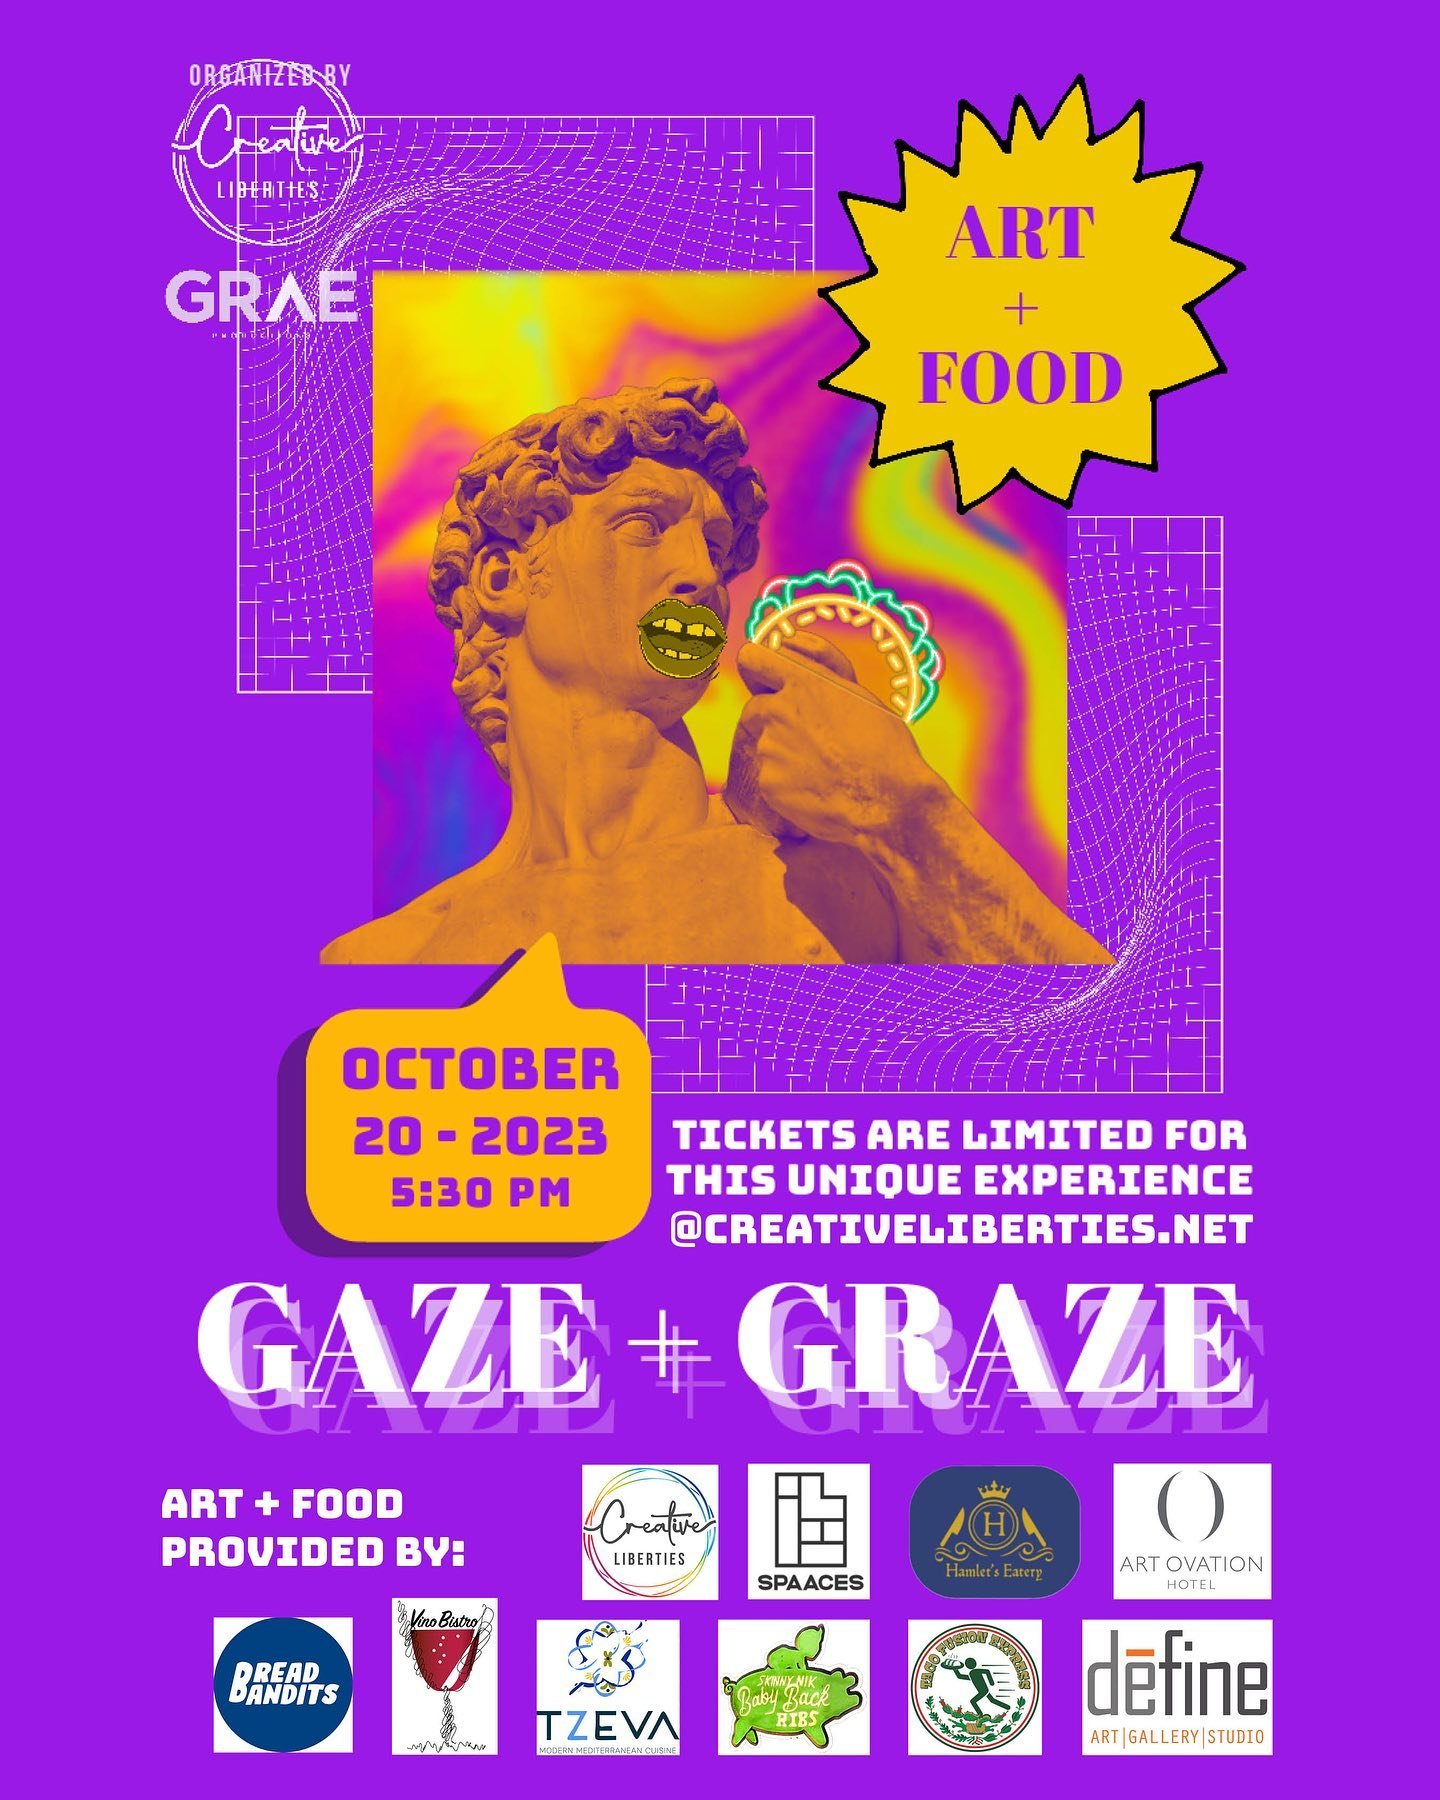 Get your ticket today for Gaze + Graze, a progressive dinner experience.  Where local art meets local food.  7 galleries, 7 local small plates, 1 trolley, and 38 new friends. 

Join us on this journey October 20th, 5:30pm 
Tickets available now at ww